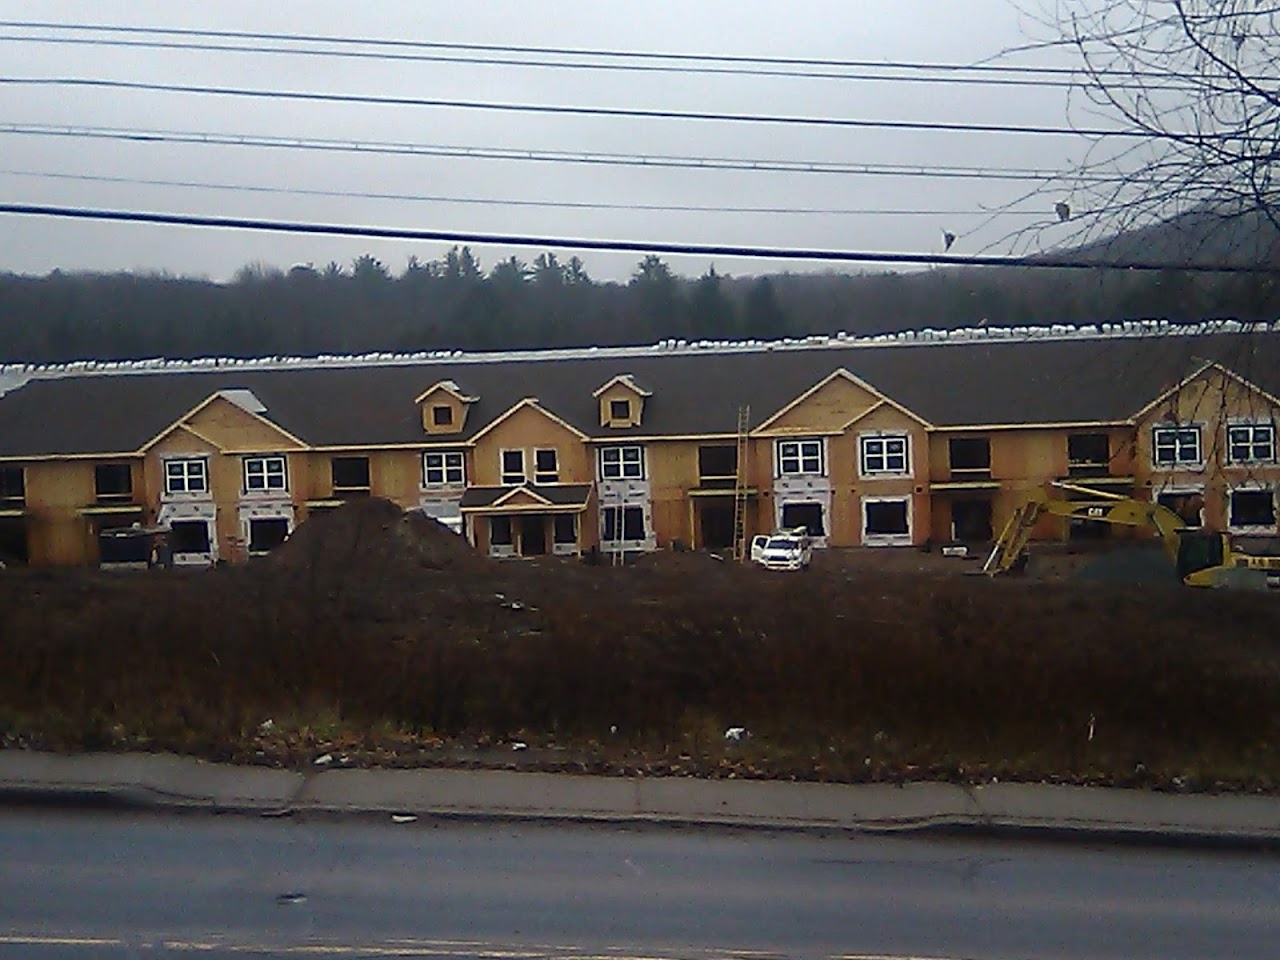 Photo of CHESTNUT STREET APARTMENTS. Affordable housing located at 196 CHESTNUT STREET LIBERTY, NY 12754